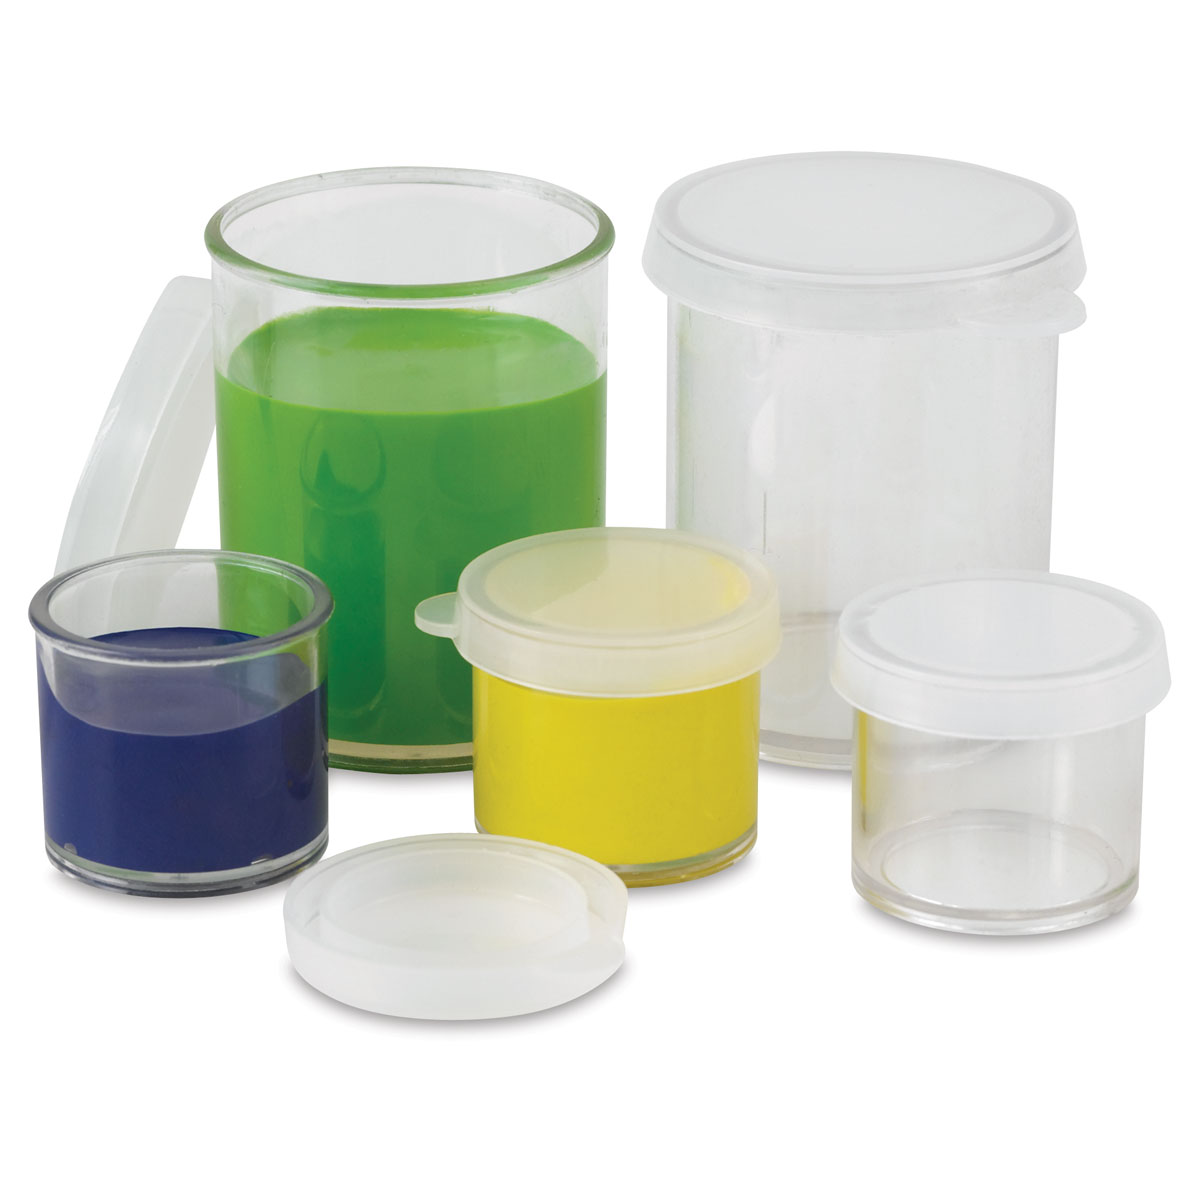 Connected Paint Containers with 6 pods 080050 Lapods for Art